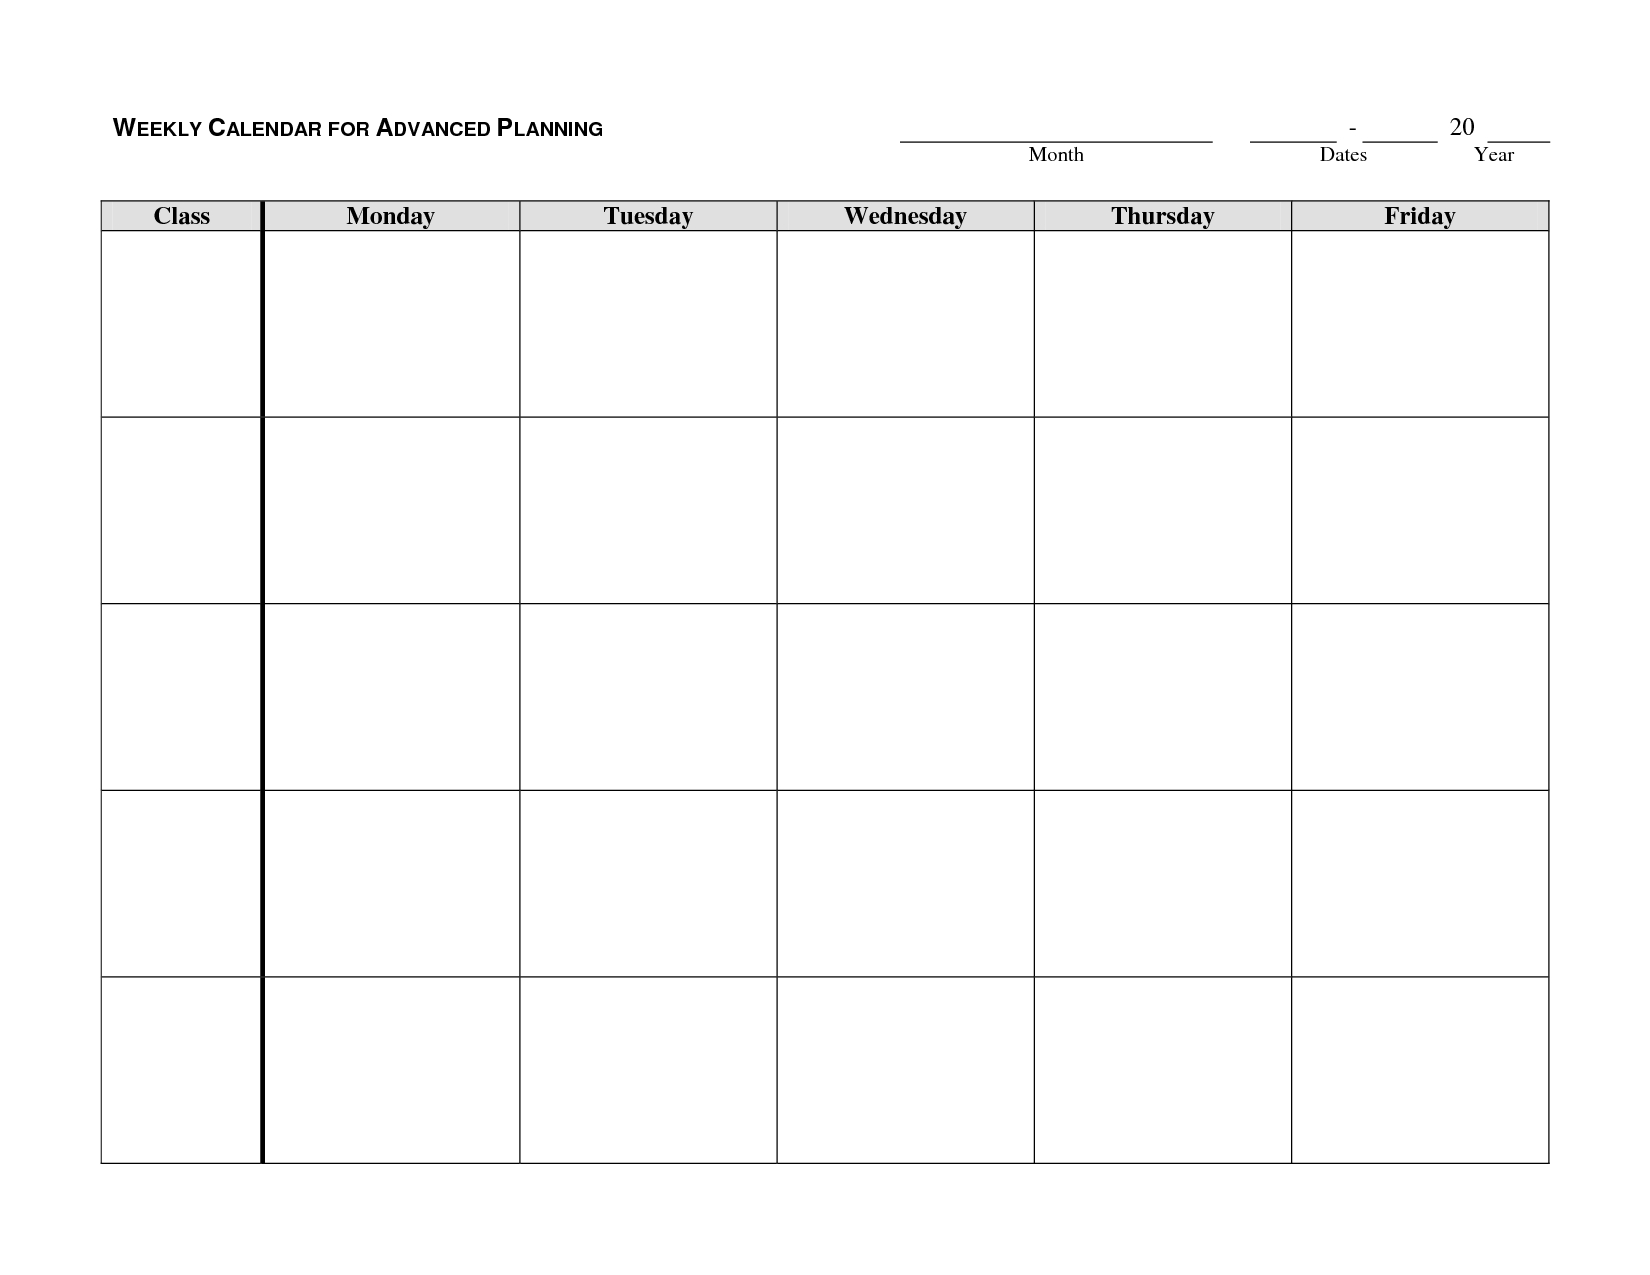 Pin On Weekly Calendar within Monday Through Friday Weekly Calendar Template